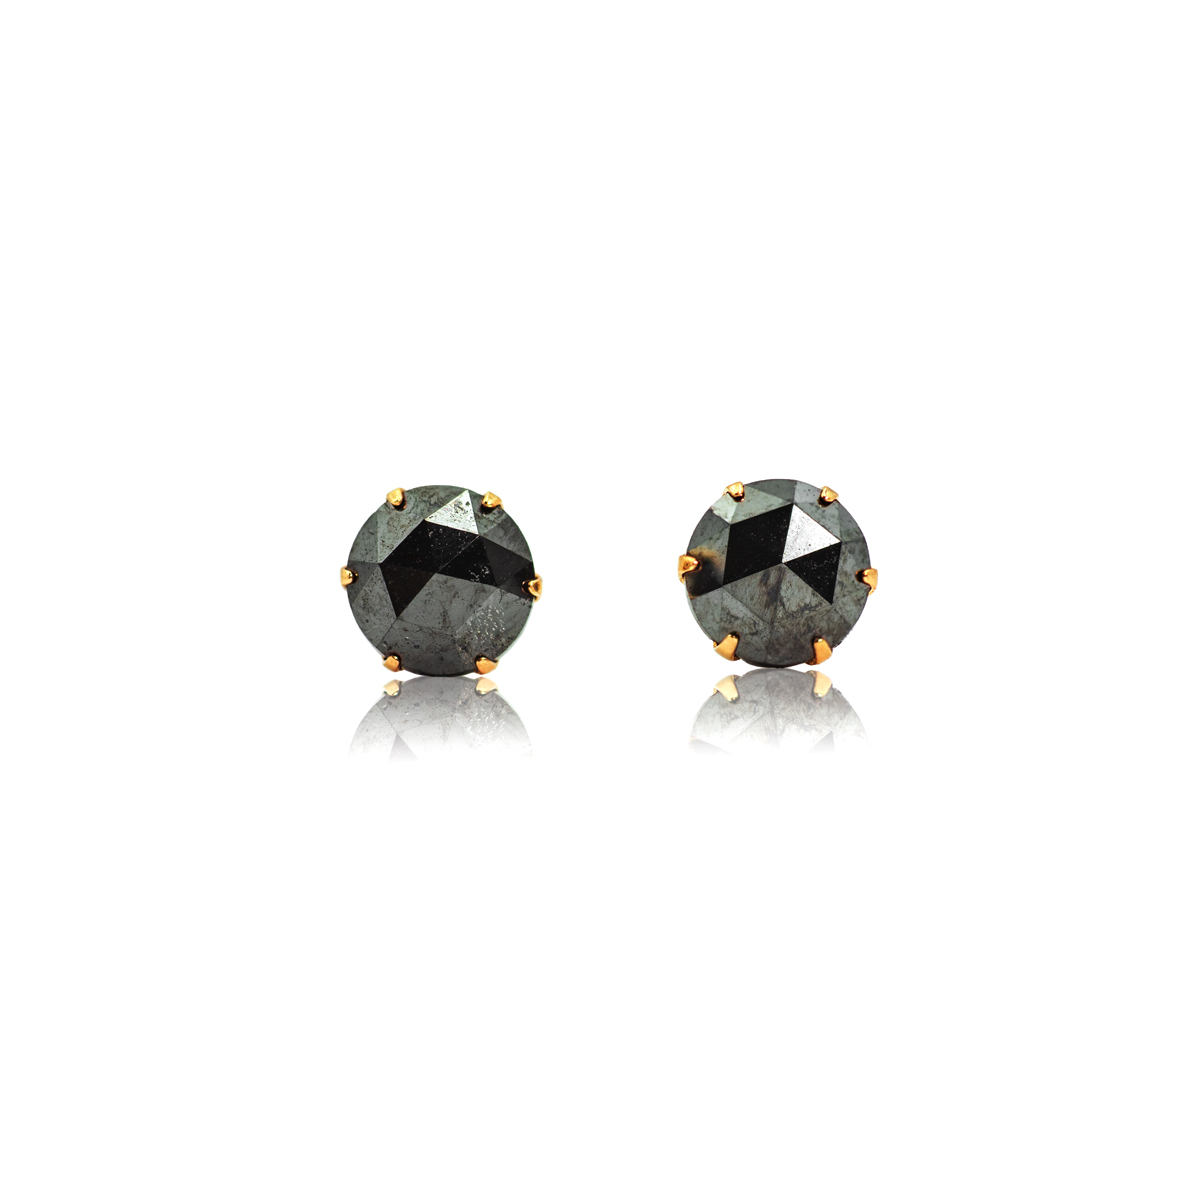 Round Shaped Stud Earrings in 18k Yellow Gold with Natural Black Diamond